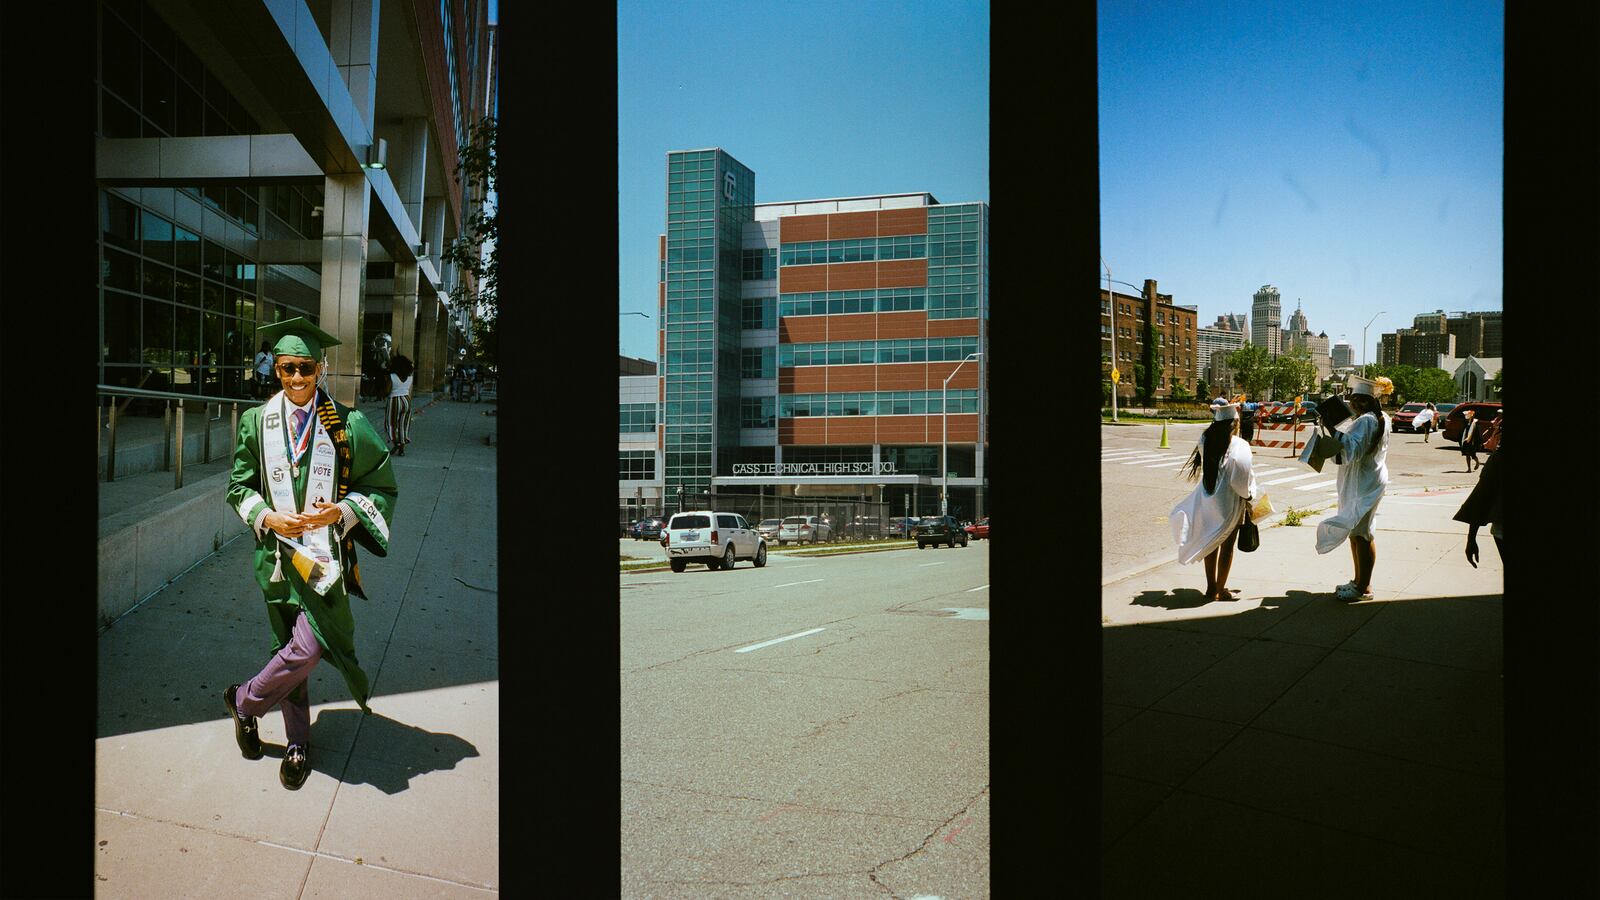 (Left) A young man, the valedictorian of his class, stands in front of his high school wearing green graduation regalia with a large white sash. (Center) The facade of Cass Tech High School in Detroit, a large modern building with glass windows. (Right) Two young women in white graduation gowns walk down a street, next to a large shadow from a building.